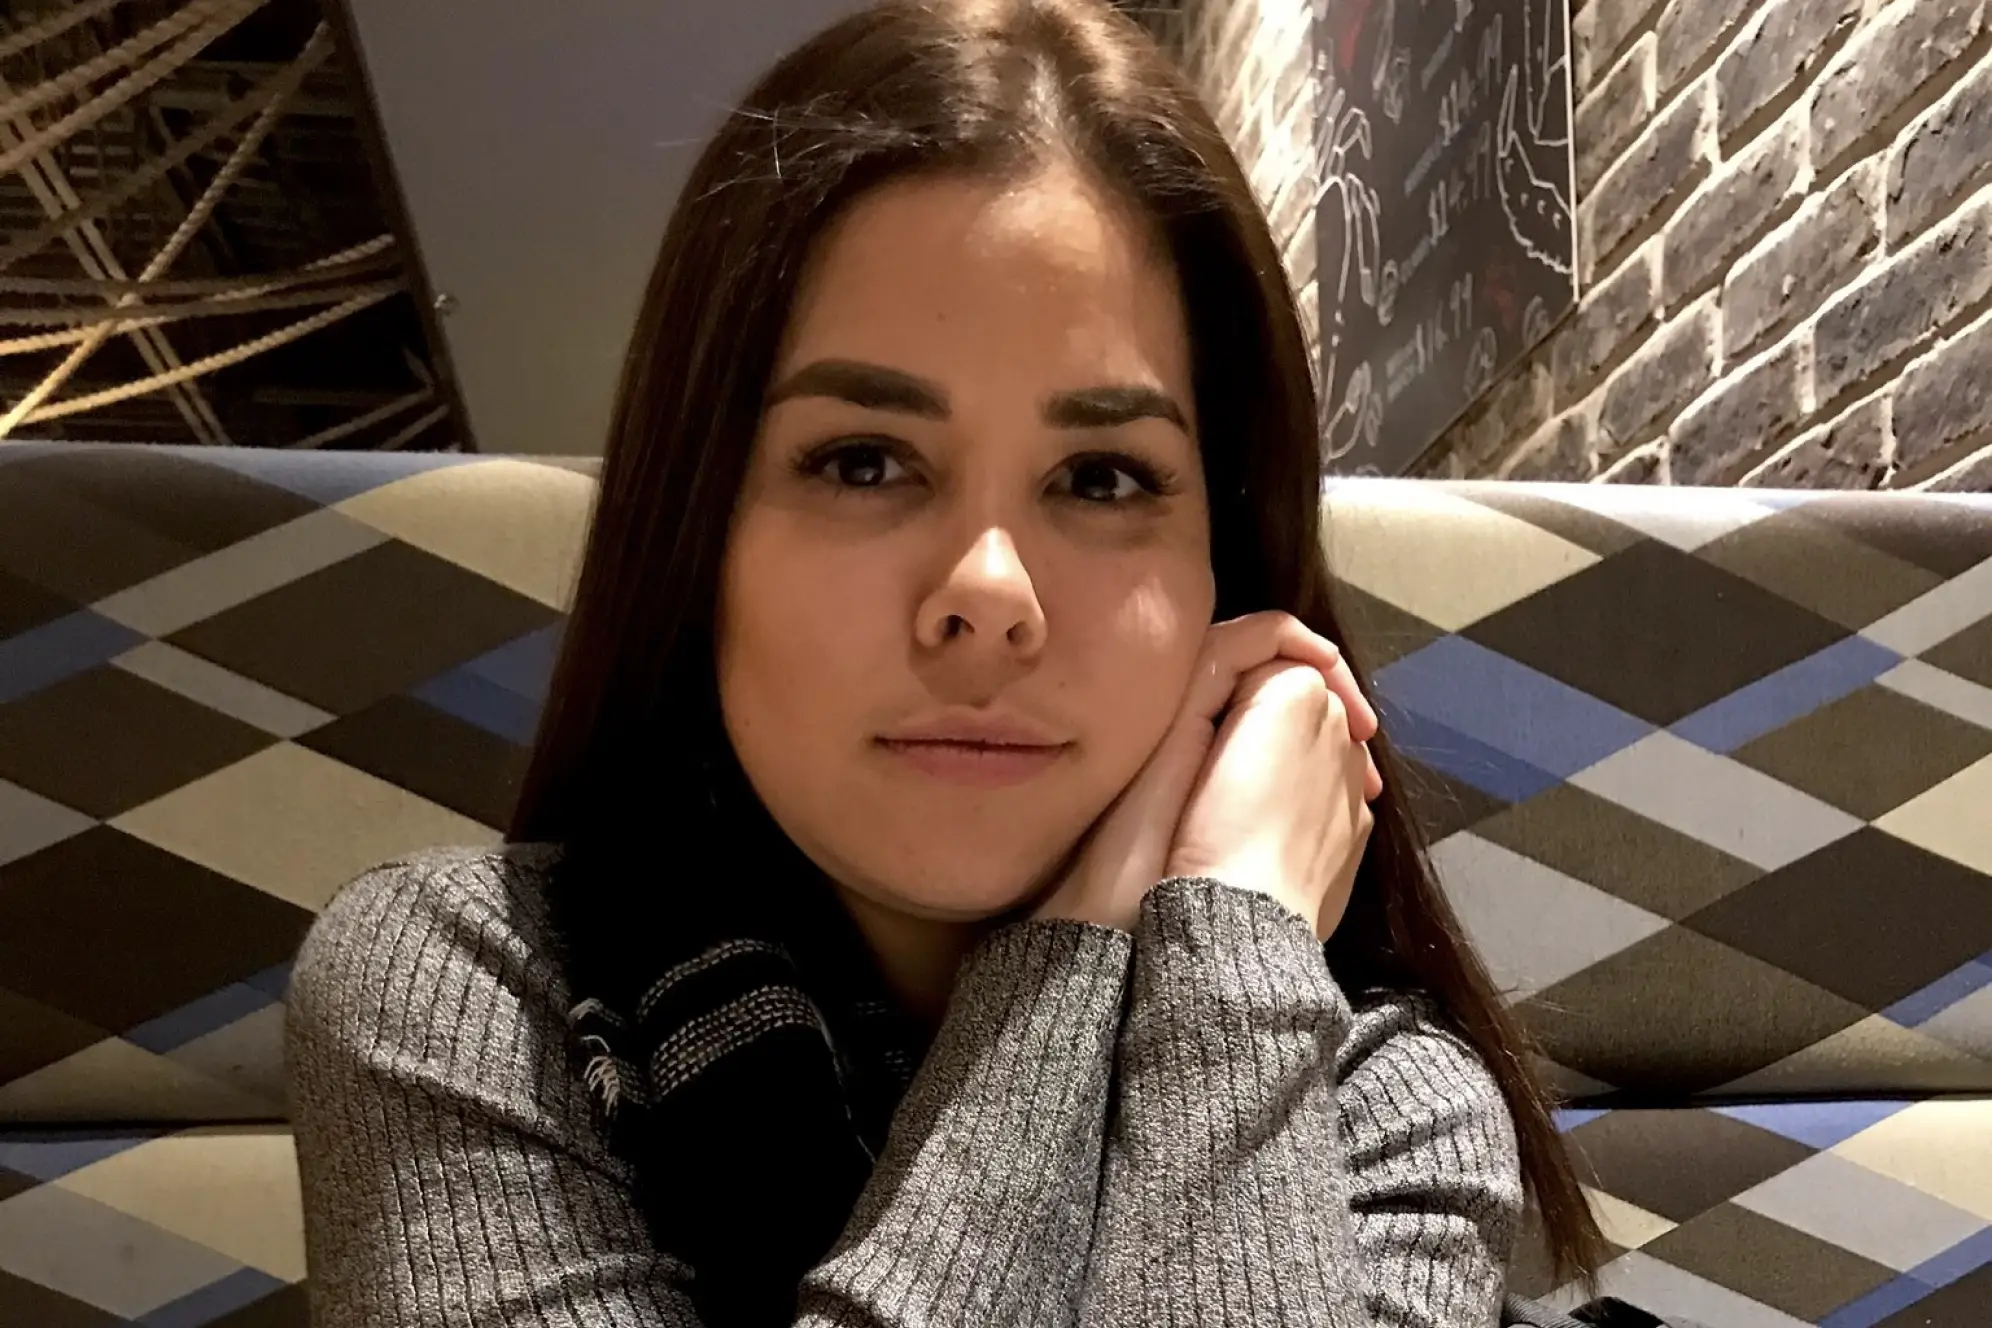 Up-close photo of a young woman looking at camera with a gray sweater sitting on a patterned bench